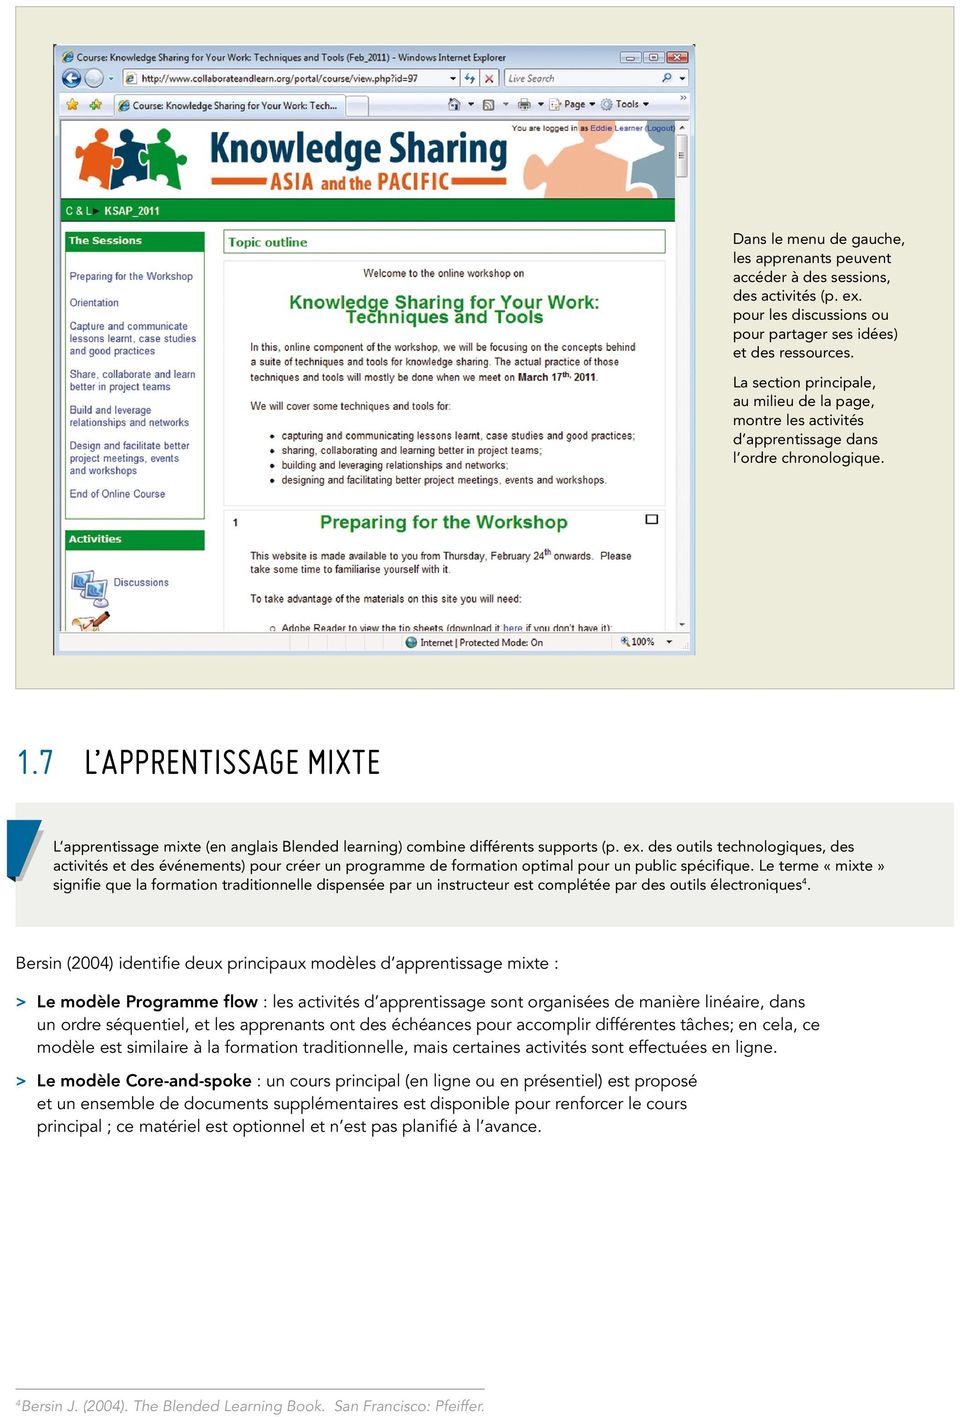 7 L apprentissage mixte L apprentissage mixte (en anglais Blended learning) combine différents supports (p. ex.